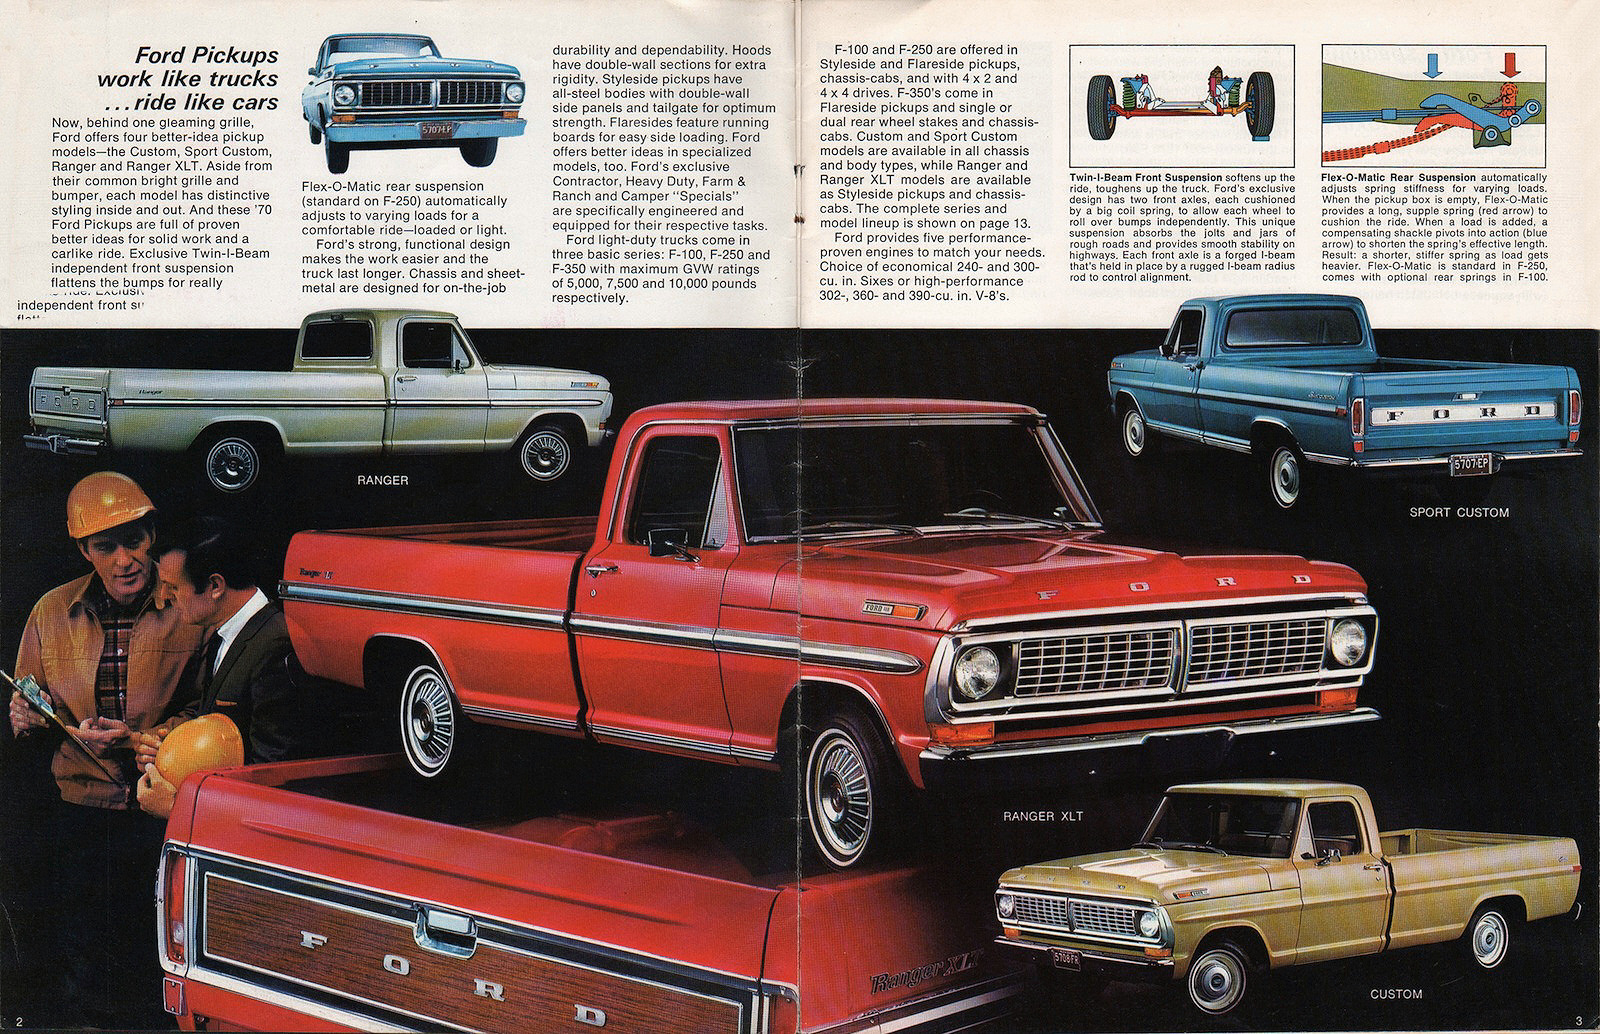 1970_Ford_Pickups-02-03